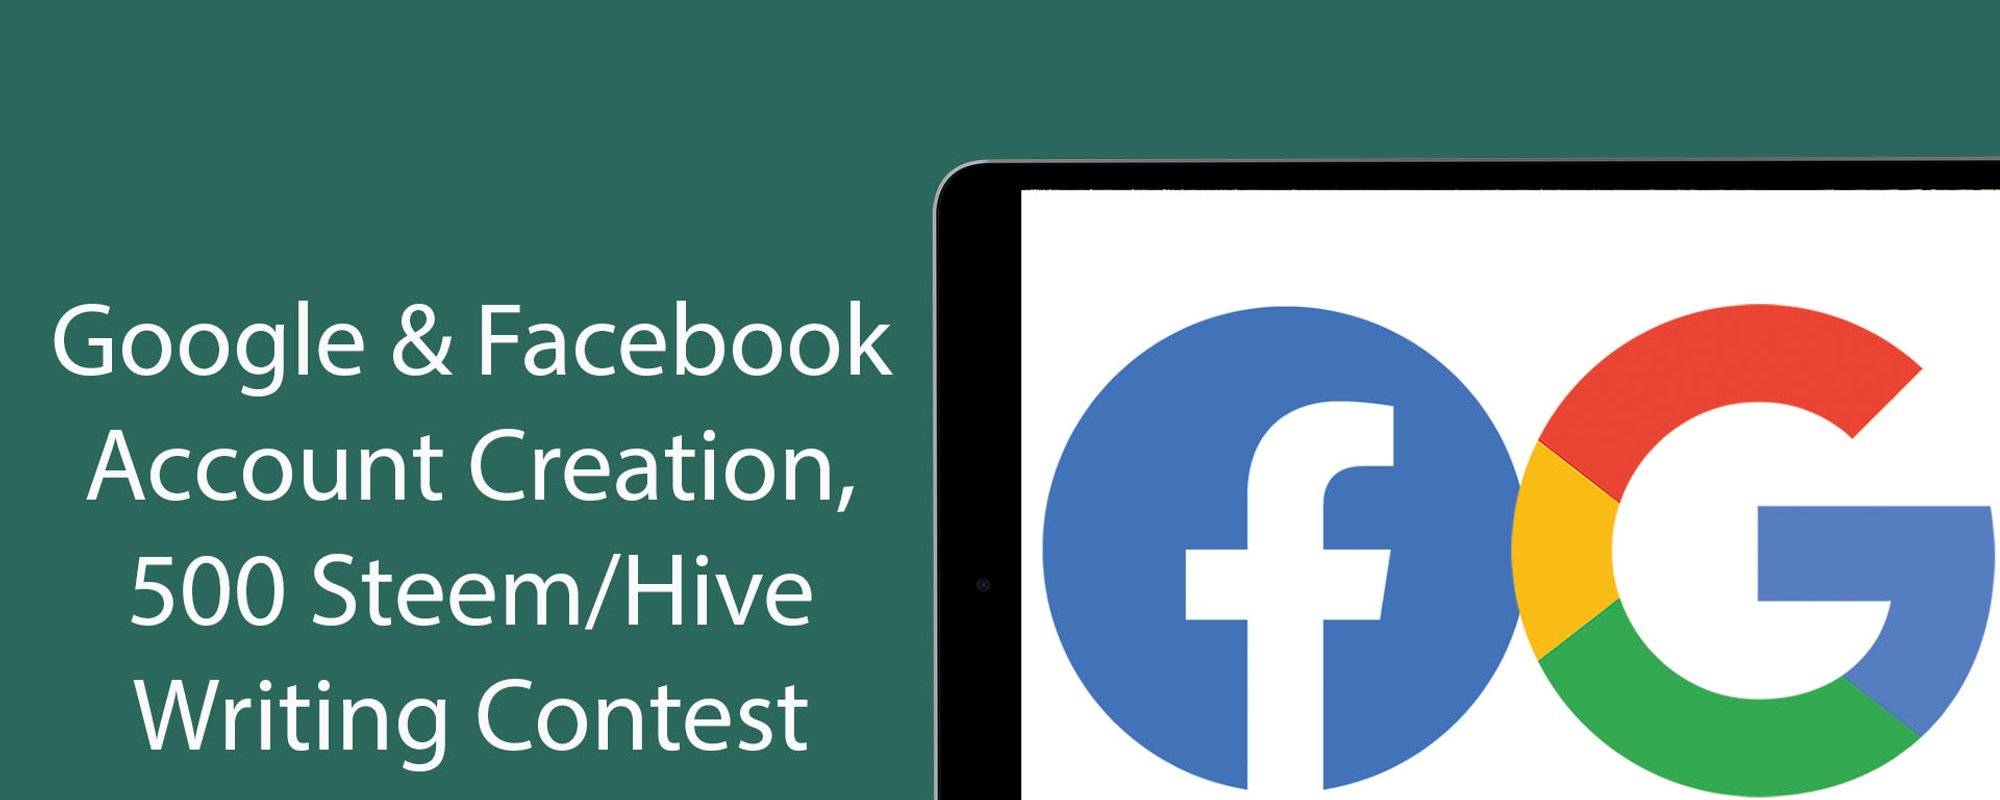 EasyAccountCreation With Facebook And Google + 500 Steem / Hive Writing Contest